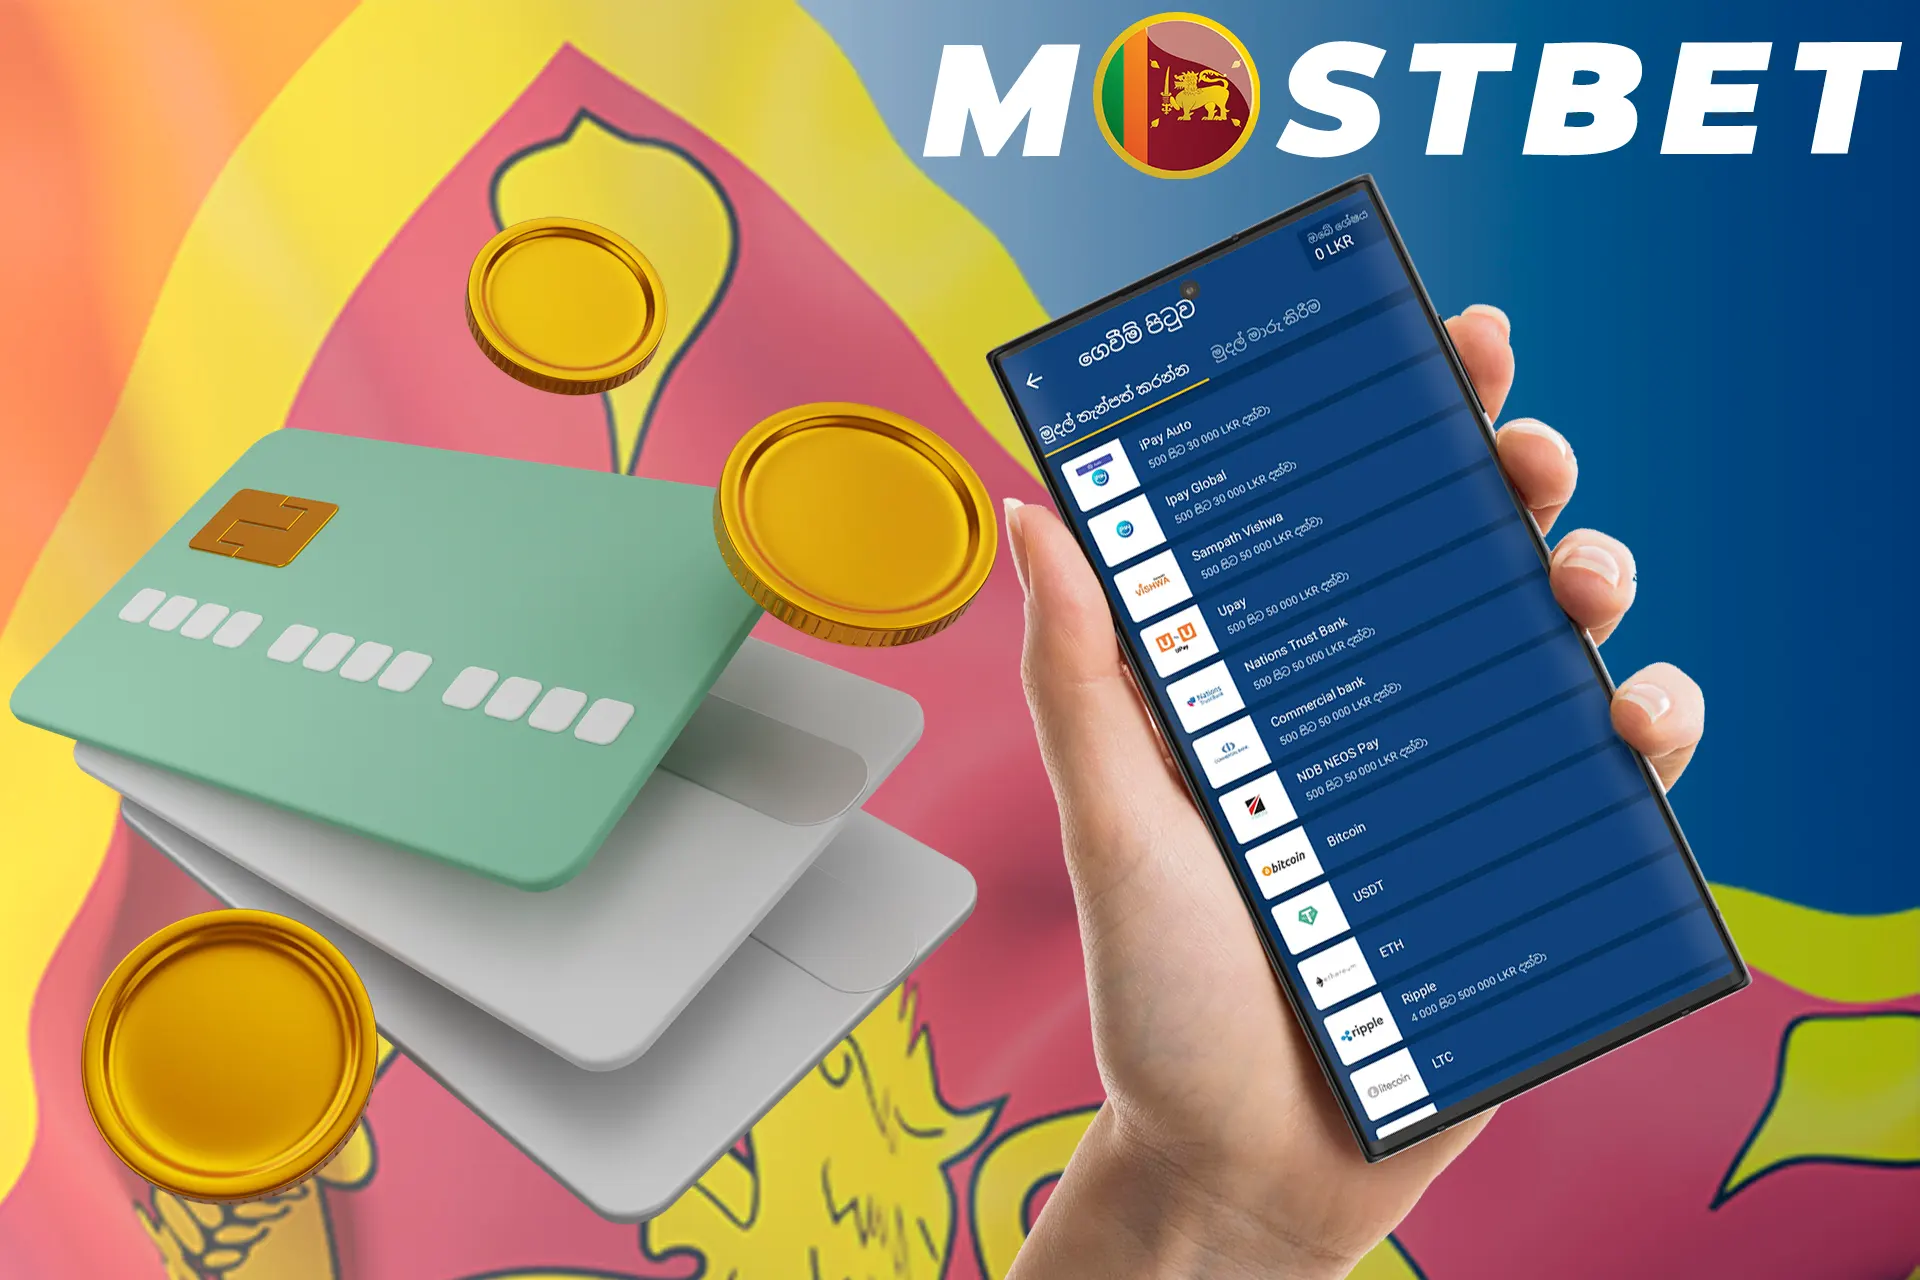 Check out the available ways to replenish your account at Mostbet Sri Lanka